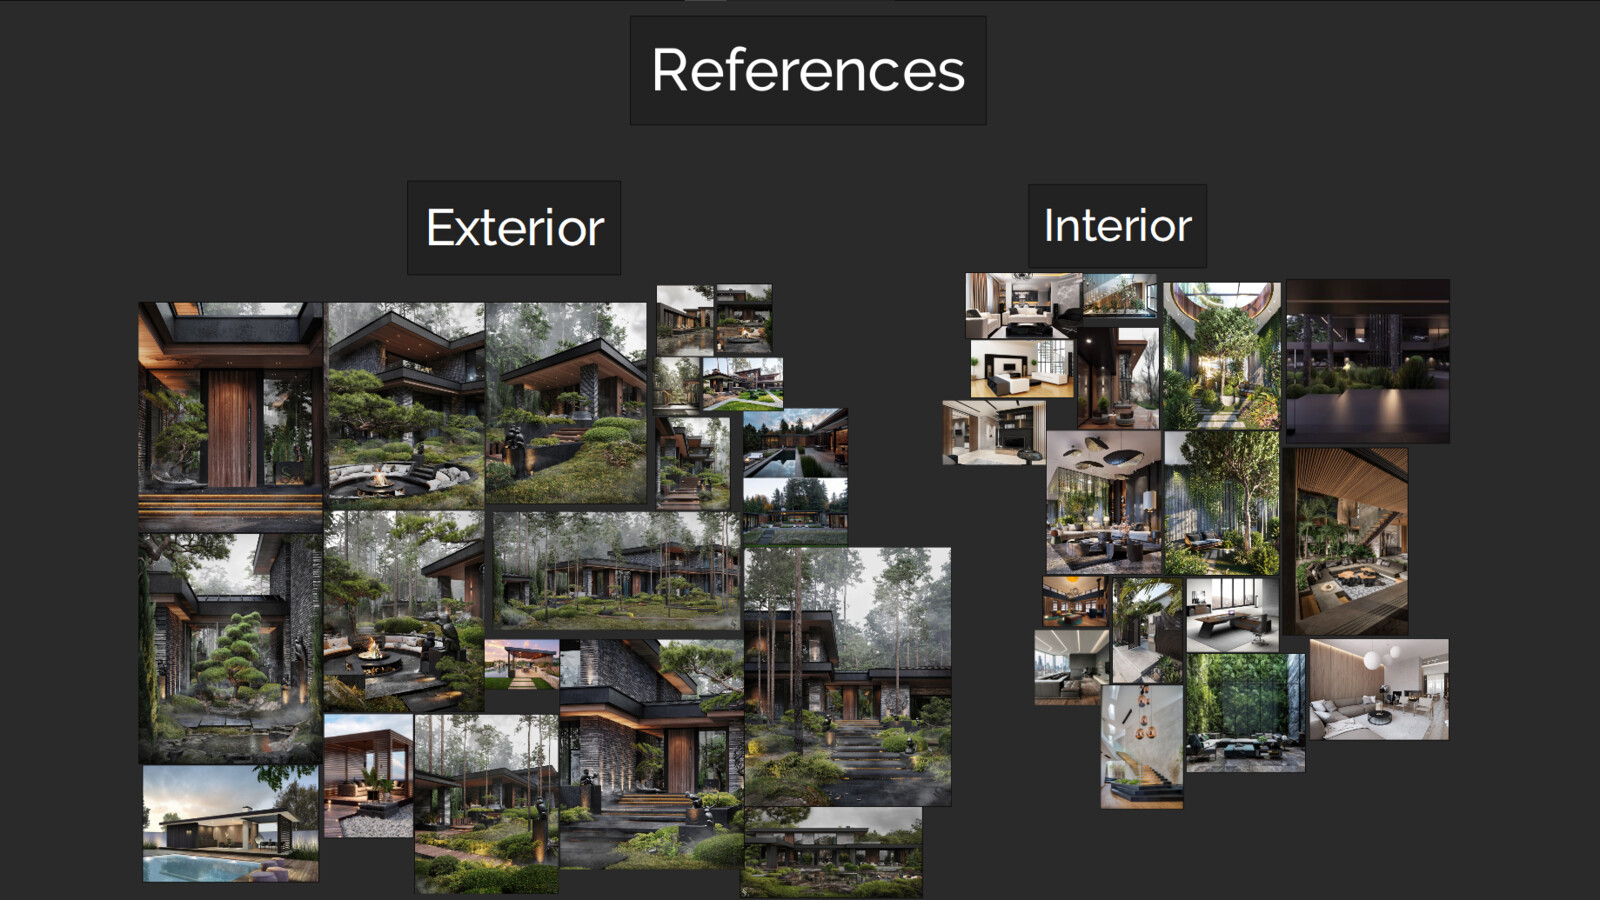 The first step is to find inspiring references. “Exterior” includes references for the exterior part of the level from the real house. “Interior” includes references to an interior of the same and other houses.